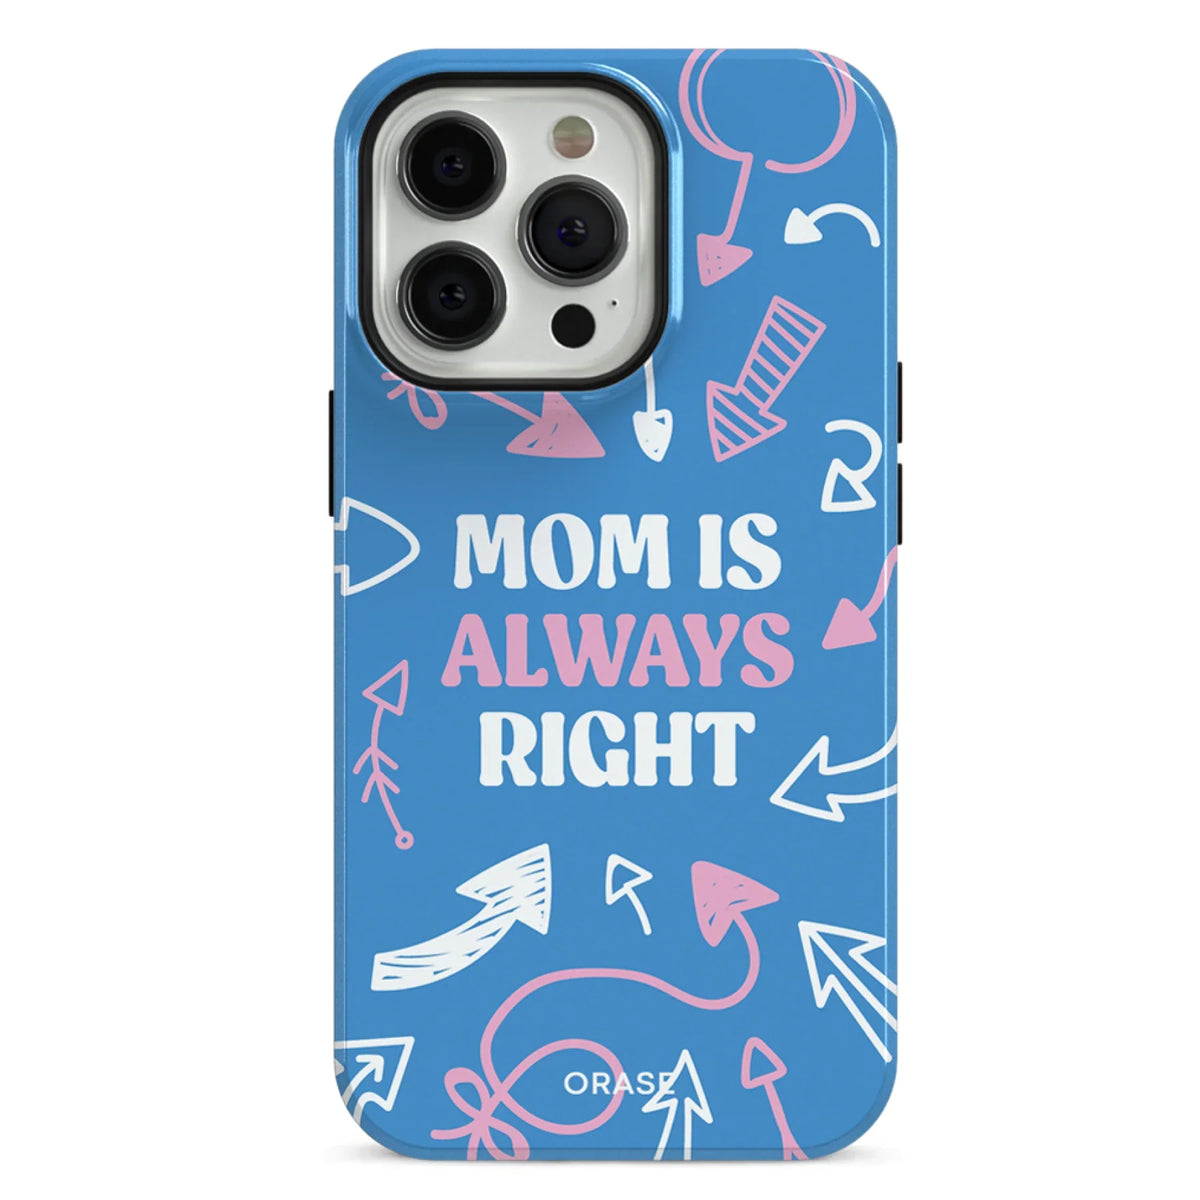 Mom Is Always Right iPhone Case - iPhone 12 Pro